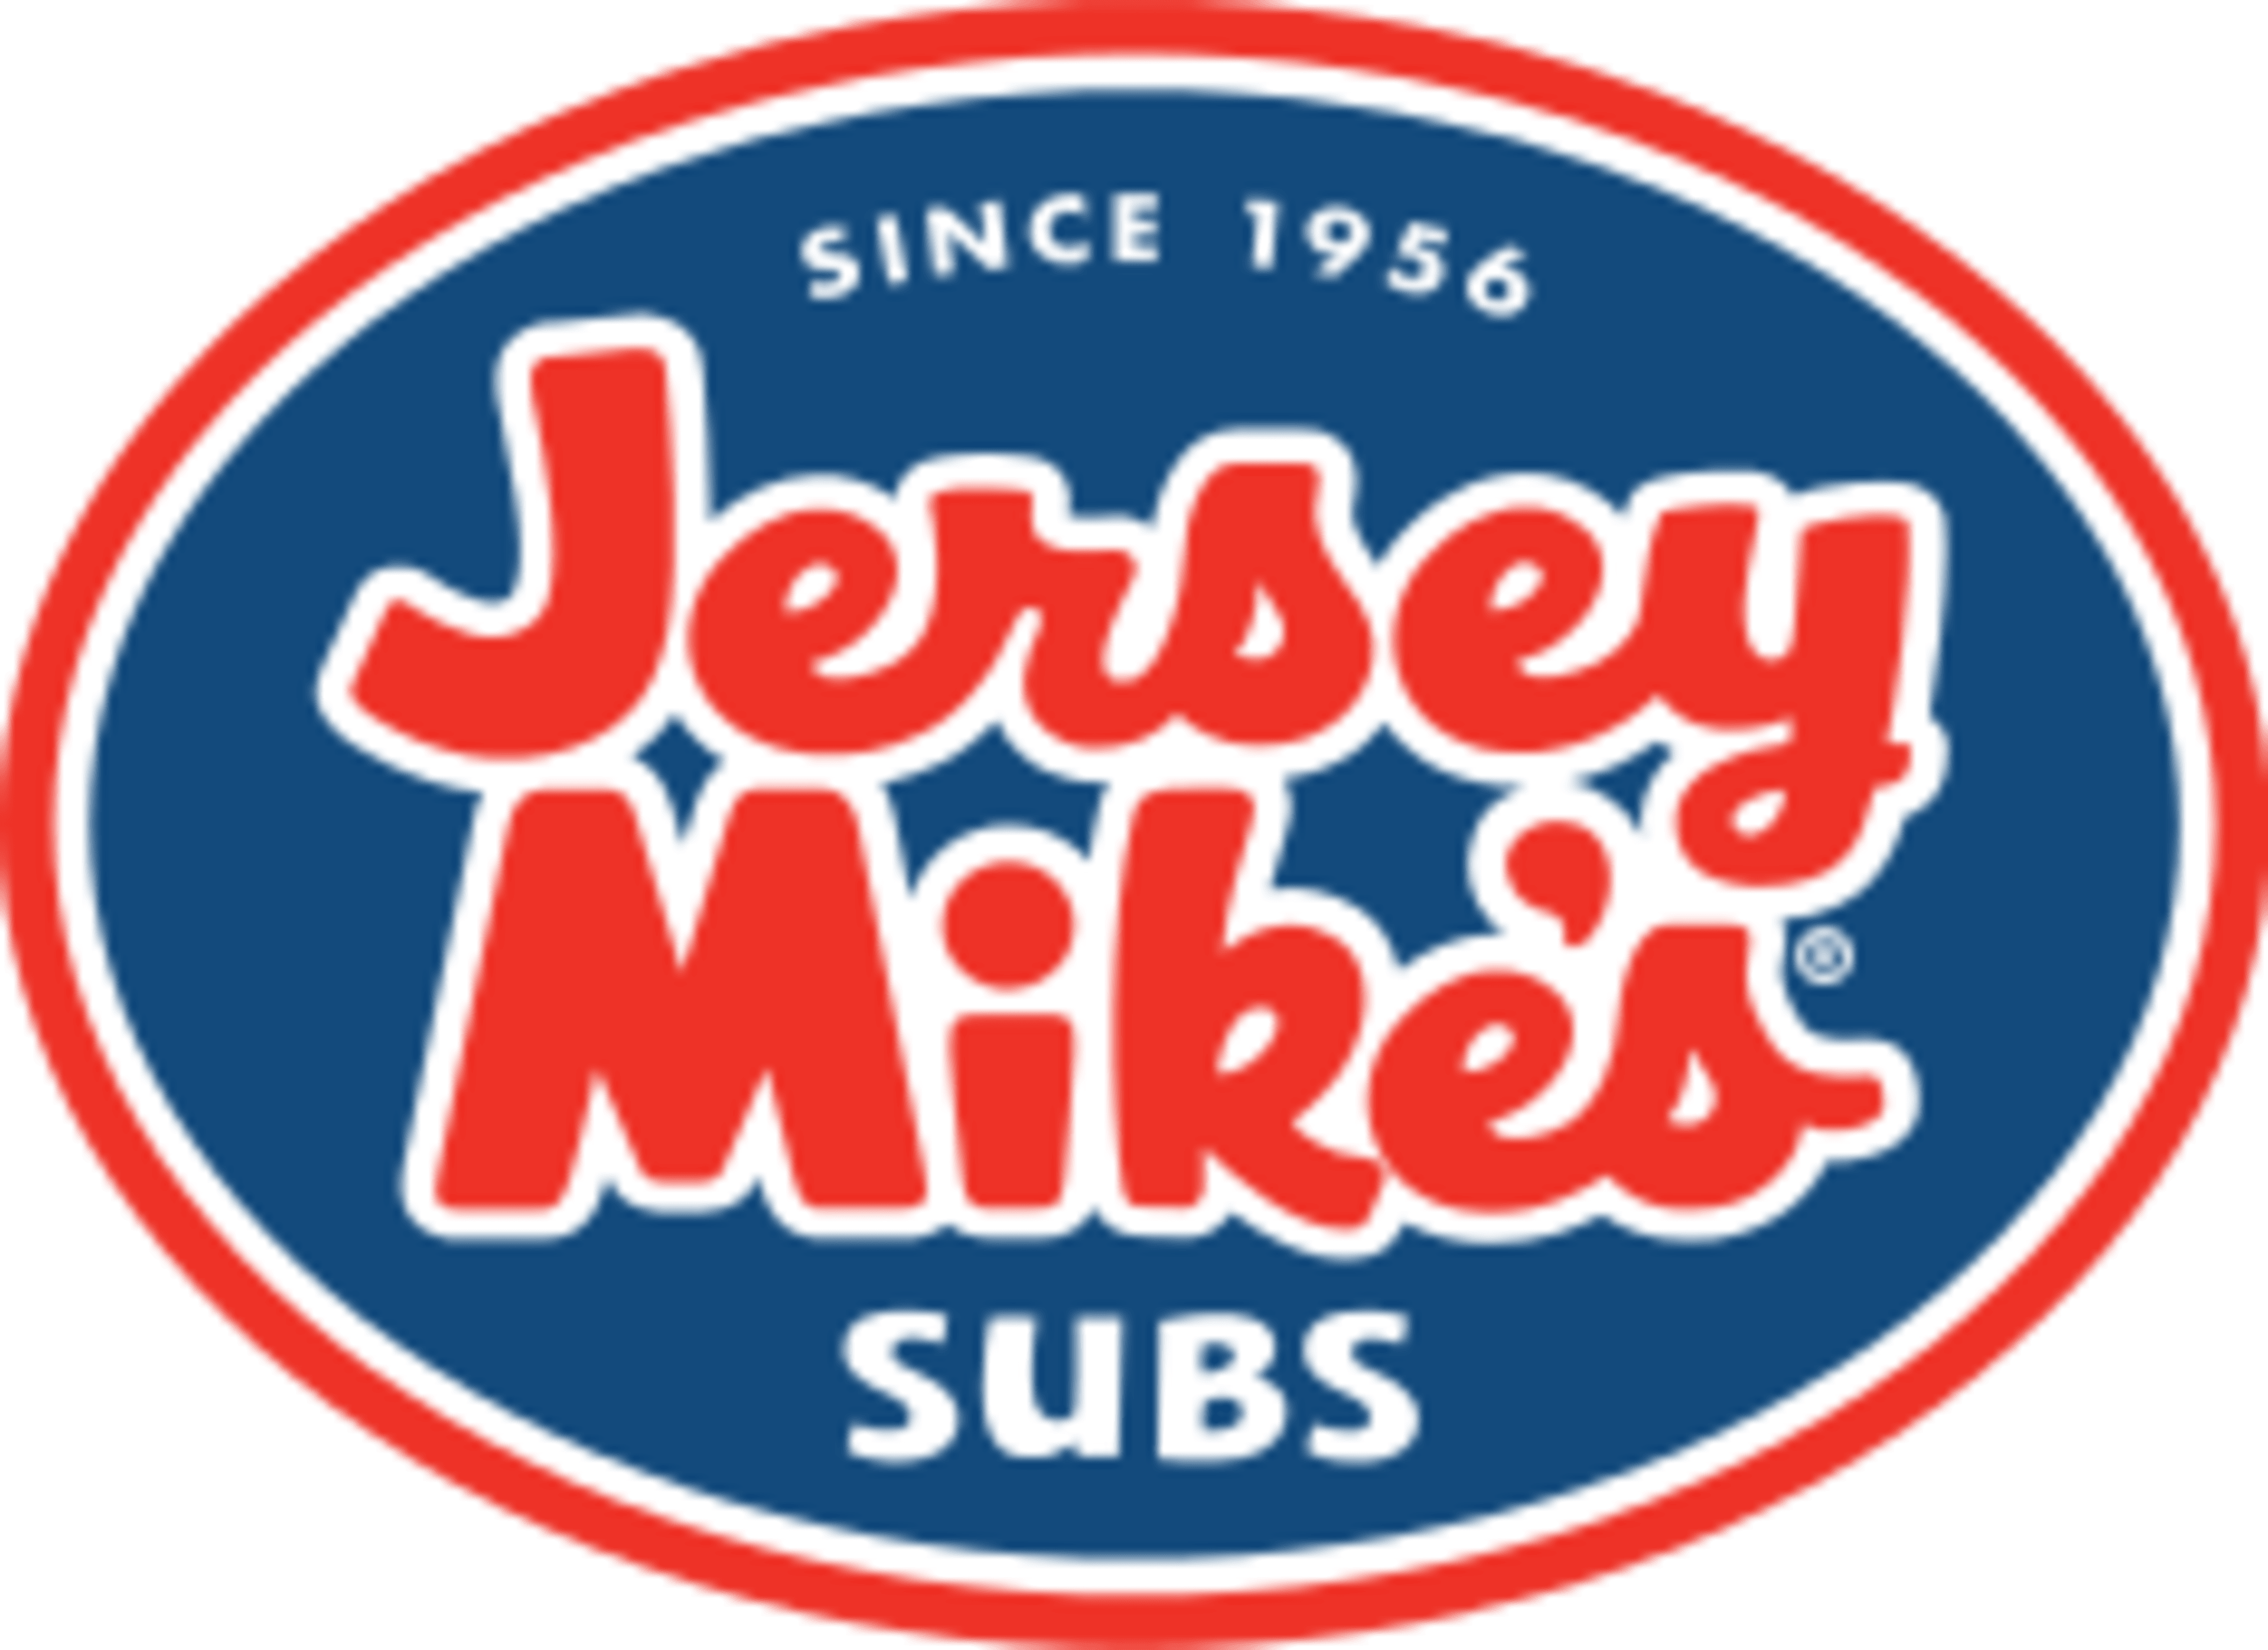 Jersey Mike's Subs Code